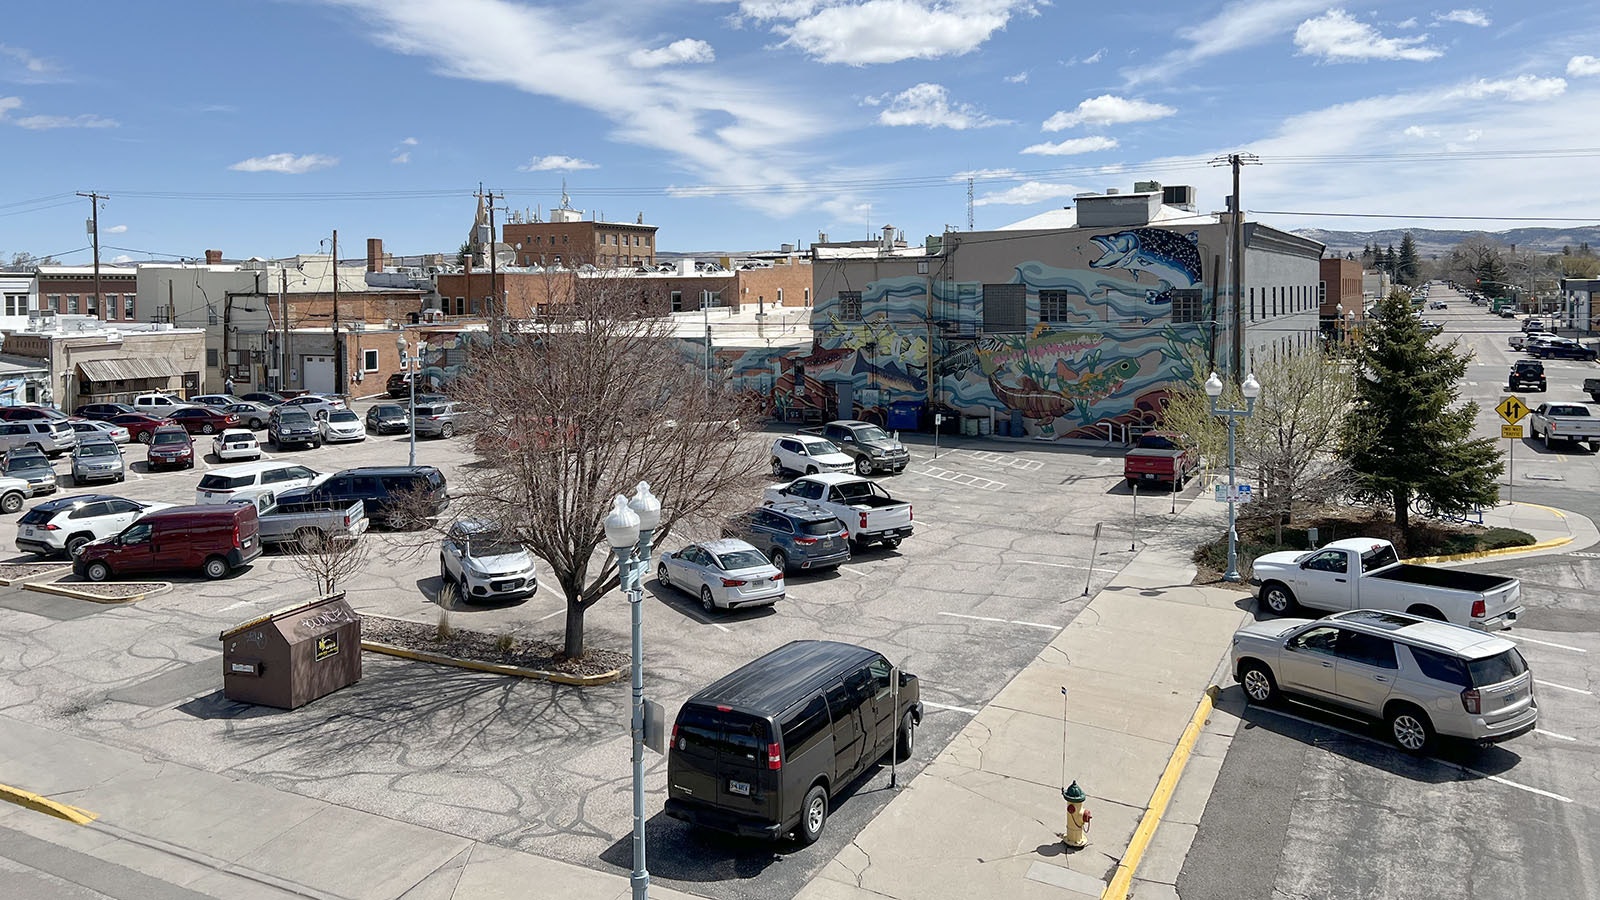 Some Laramie residents worry that a proposed five-story, 88-unit apartment building in this parking lot in the heart of downtown would take up too much space, block views of murals and hurt the historic aesthetic.